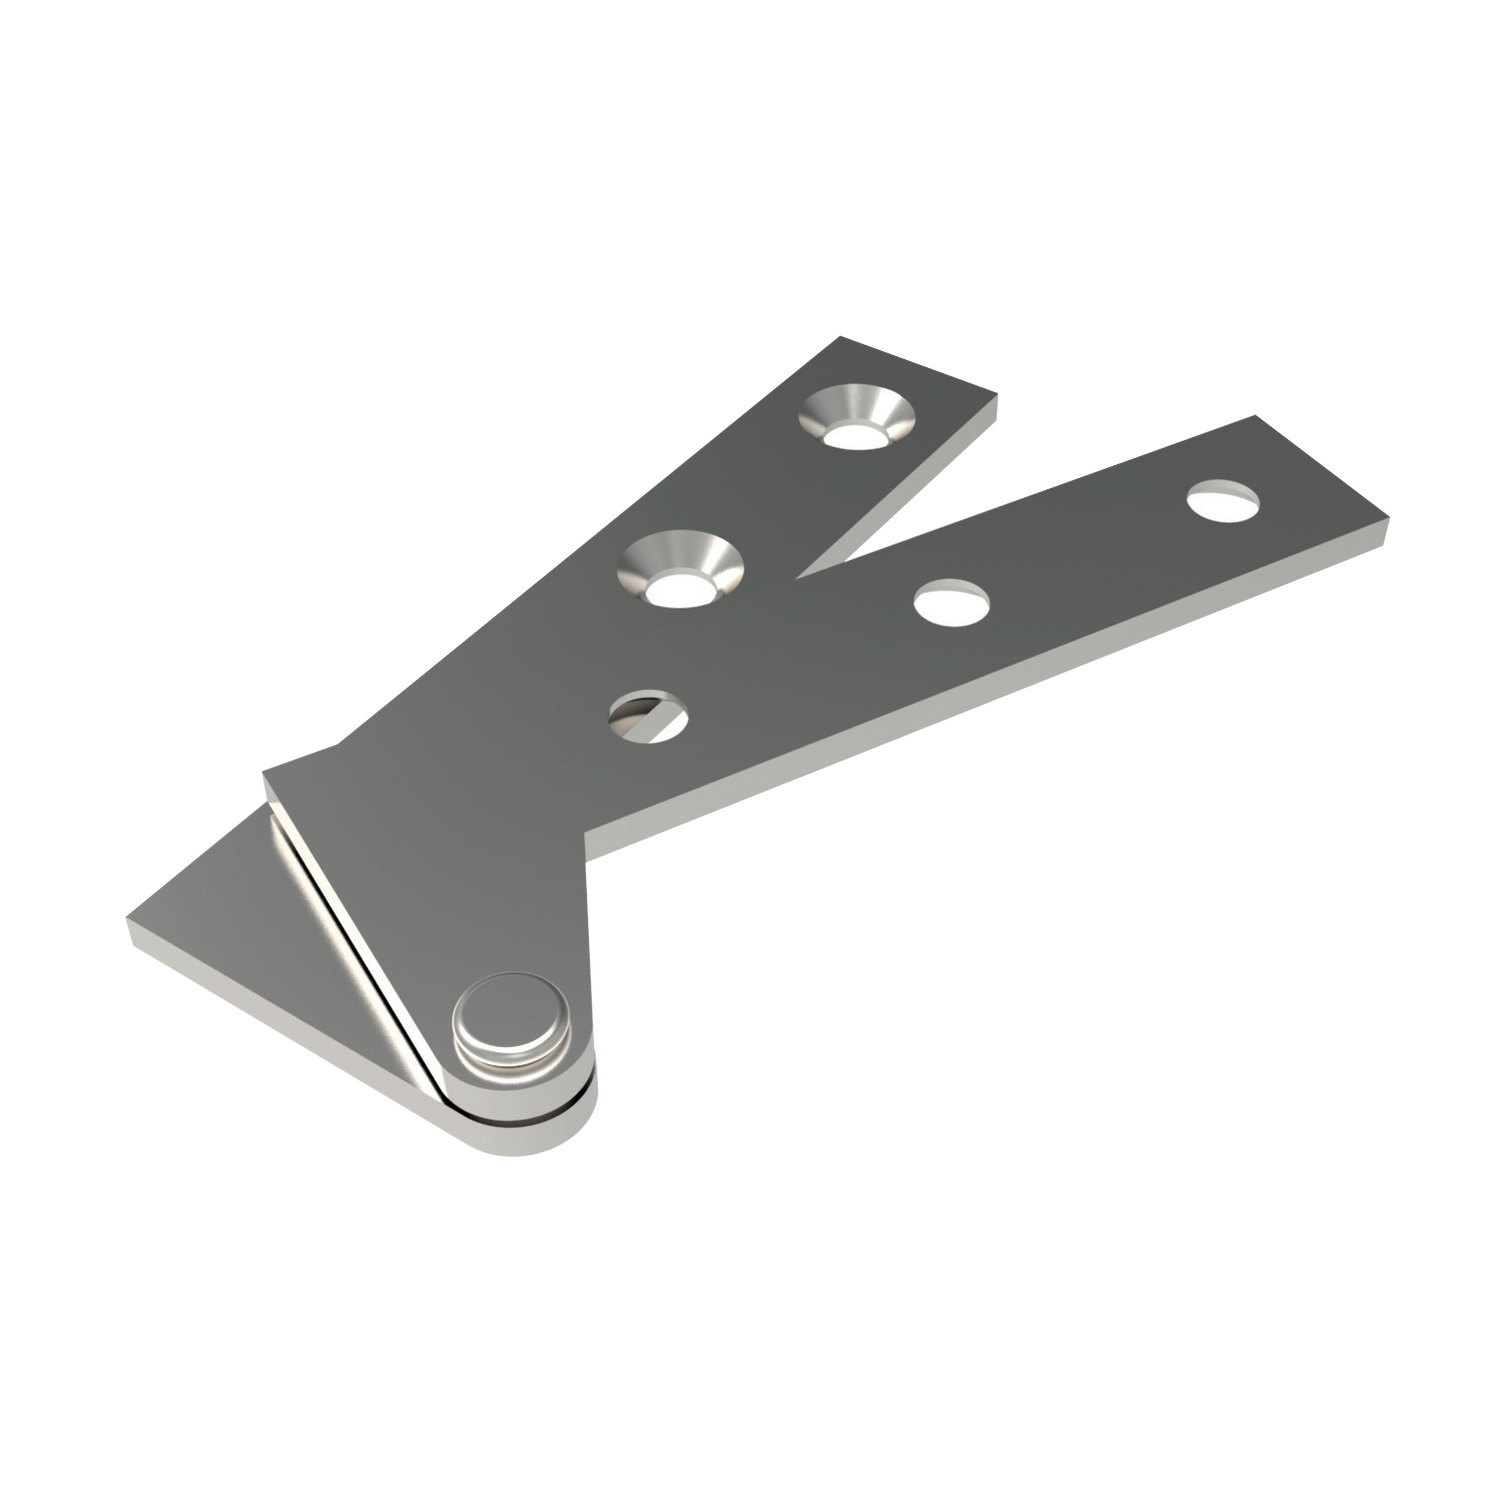 S0200.AC0010 Surface Mount - Pivot Hinges Inset - Stainless steel - Right